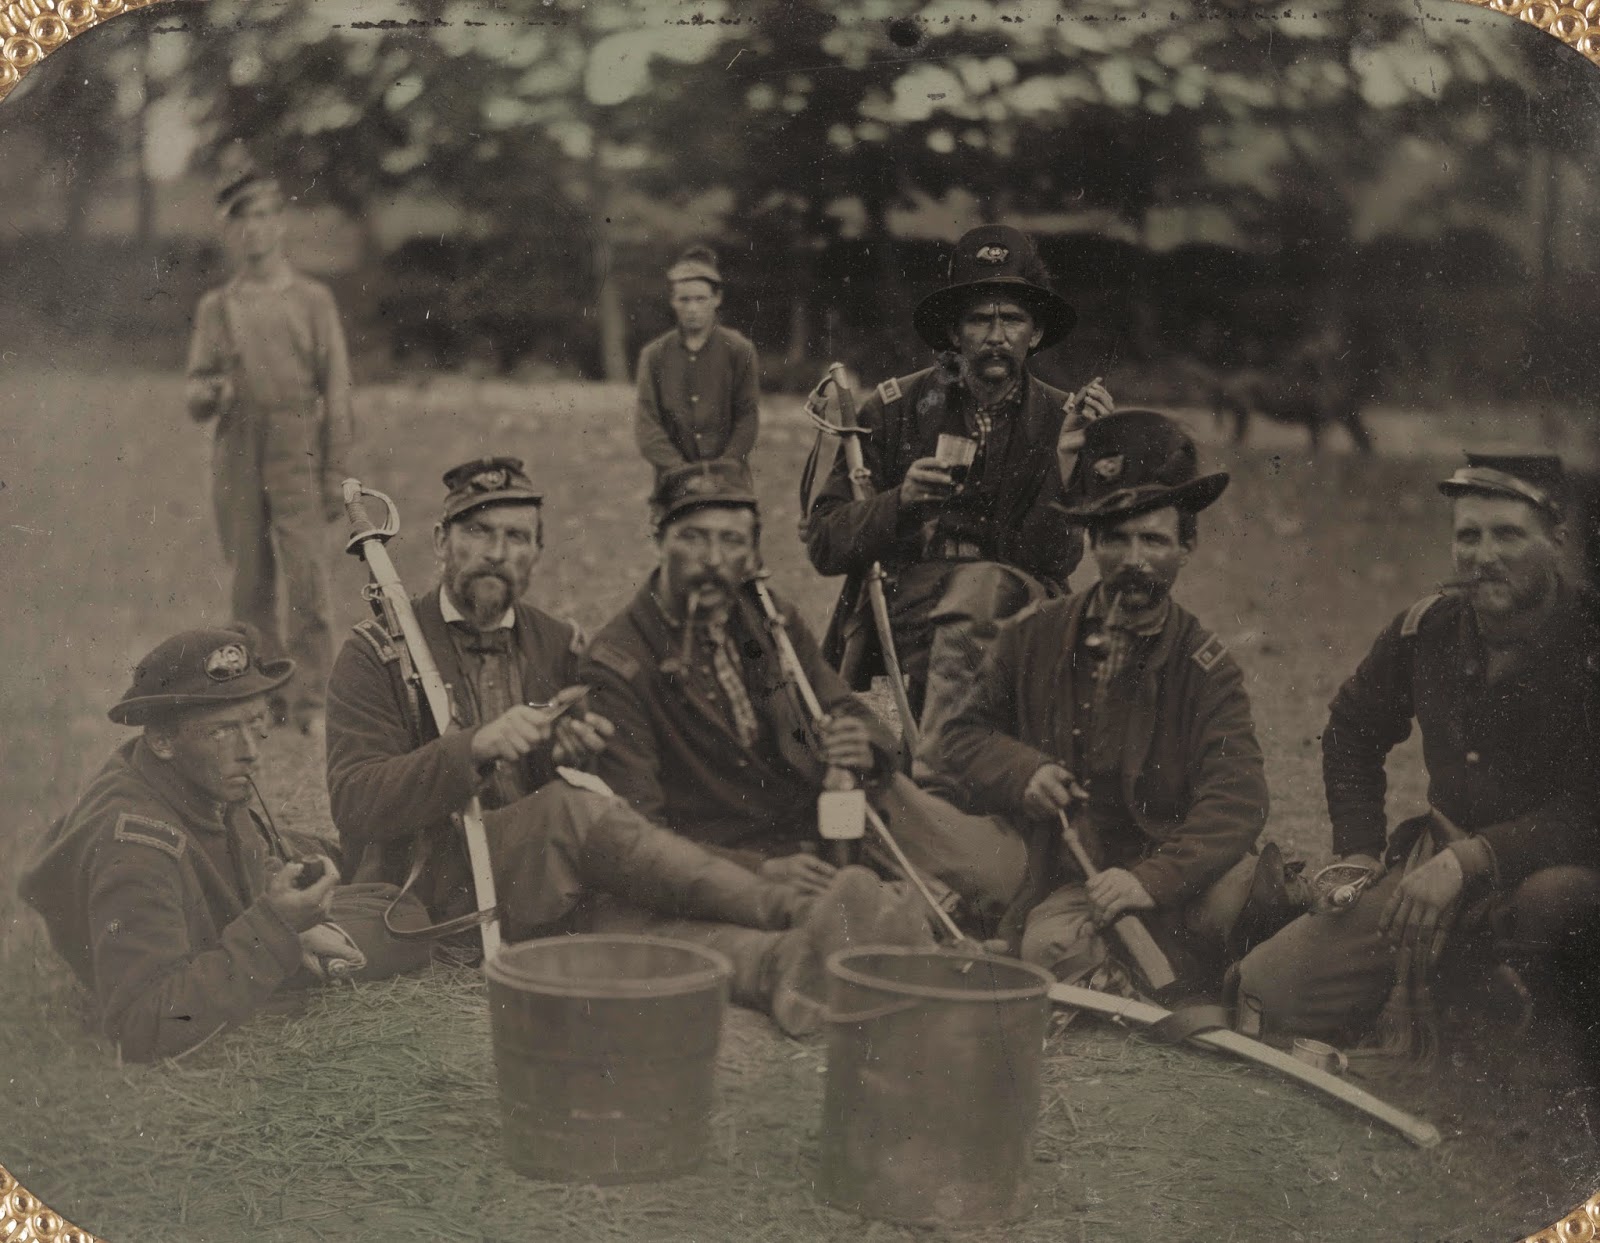 Tintype-portrait-of-a-group-of-Union-officers-of-the-the-45th-Ohio-Volunteer-Infantry-Regiment-smoking-pipes-and-cigars-and-drinking-wine-during-the-Civil-War..jpg